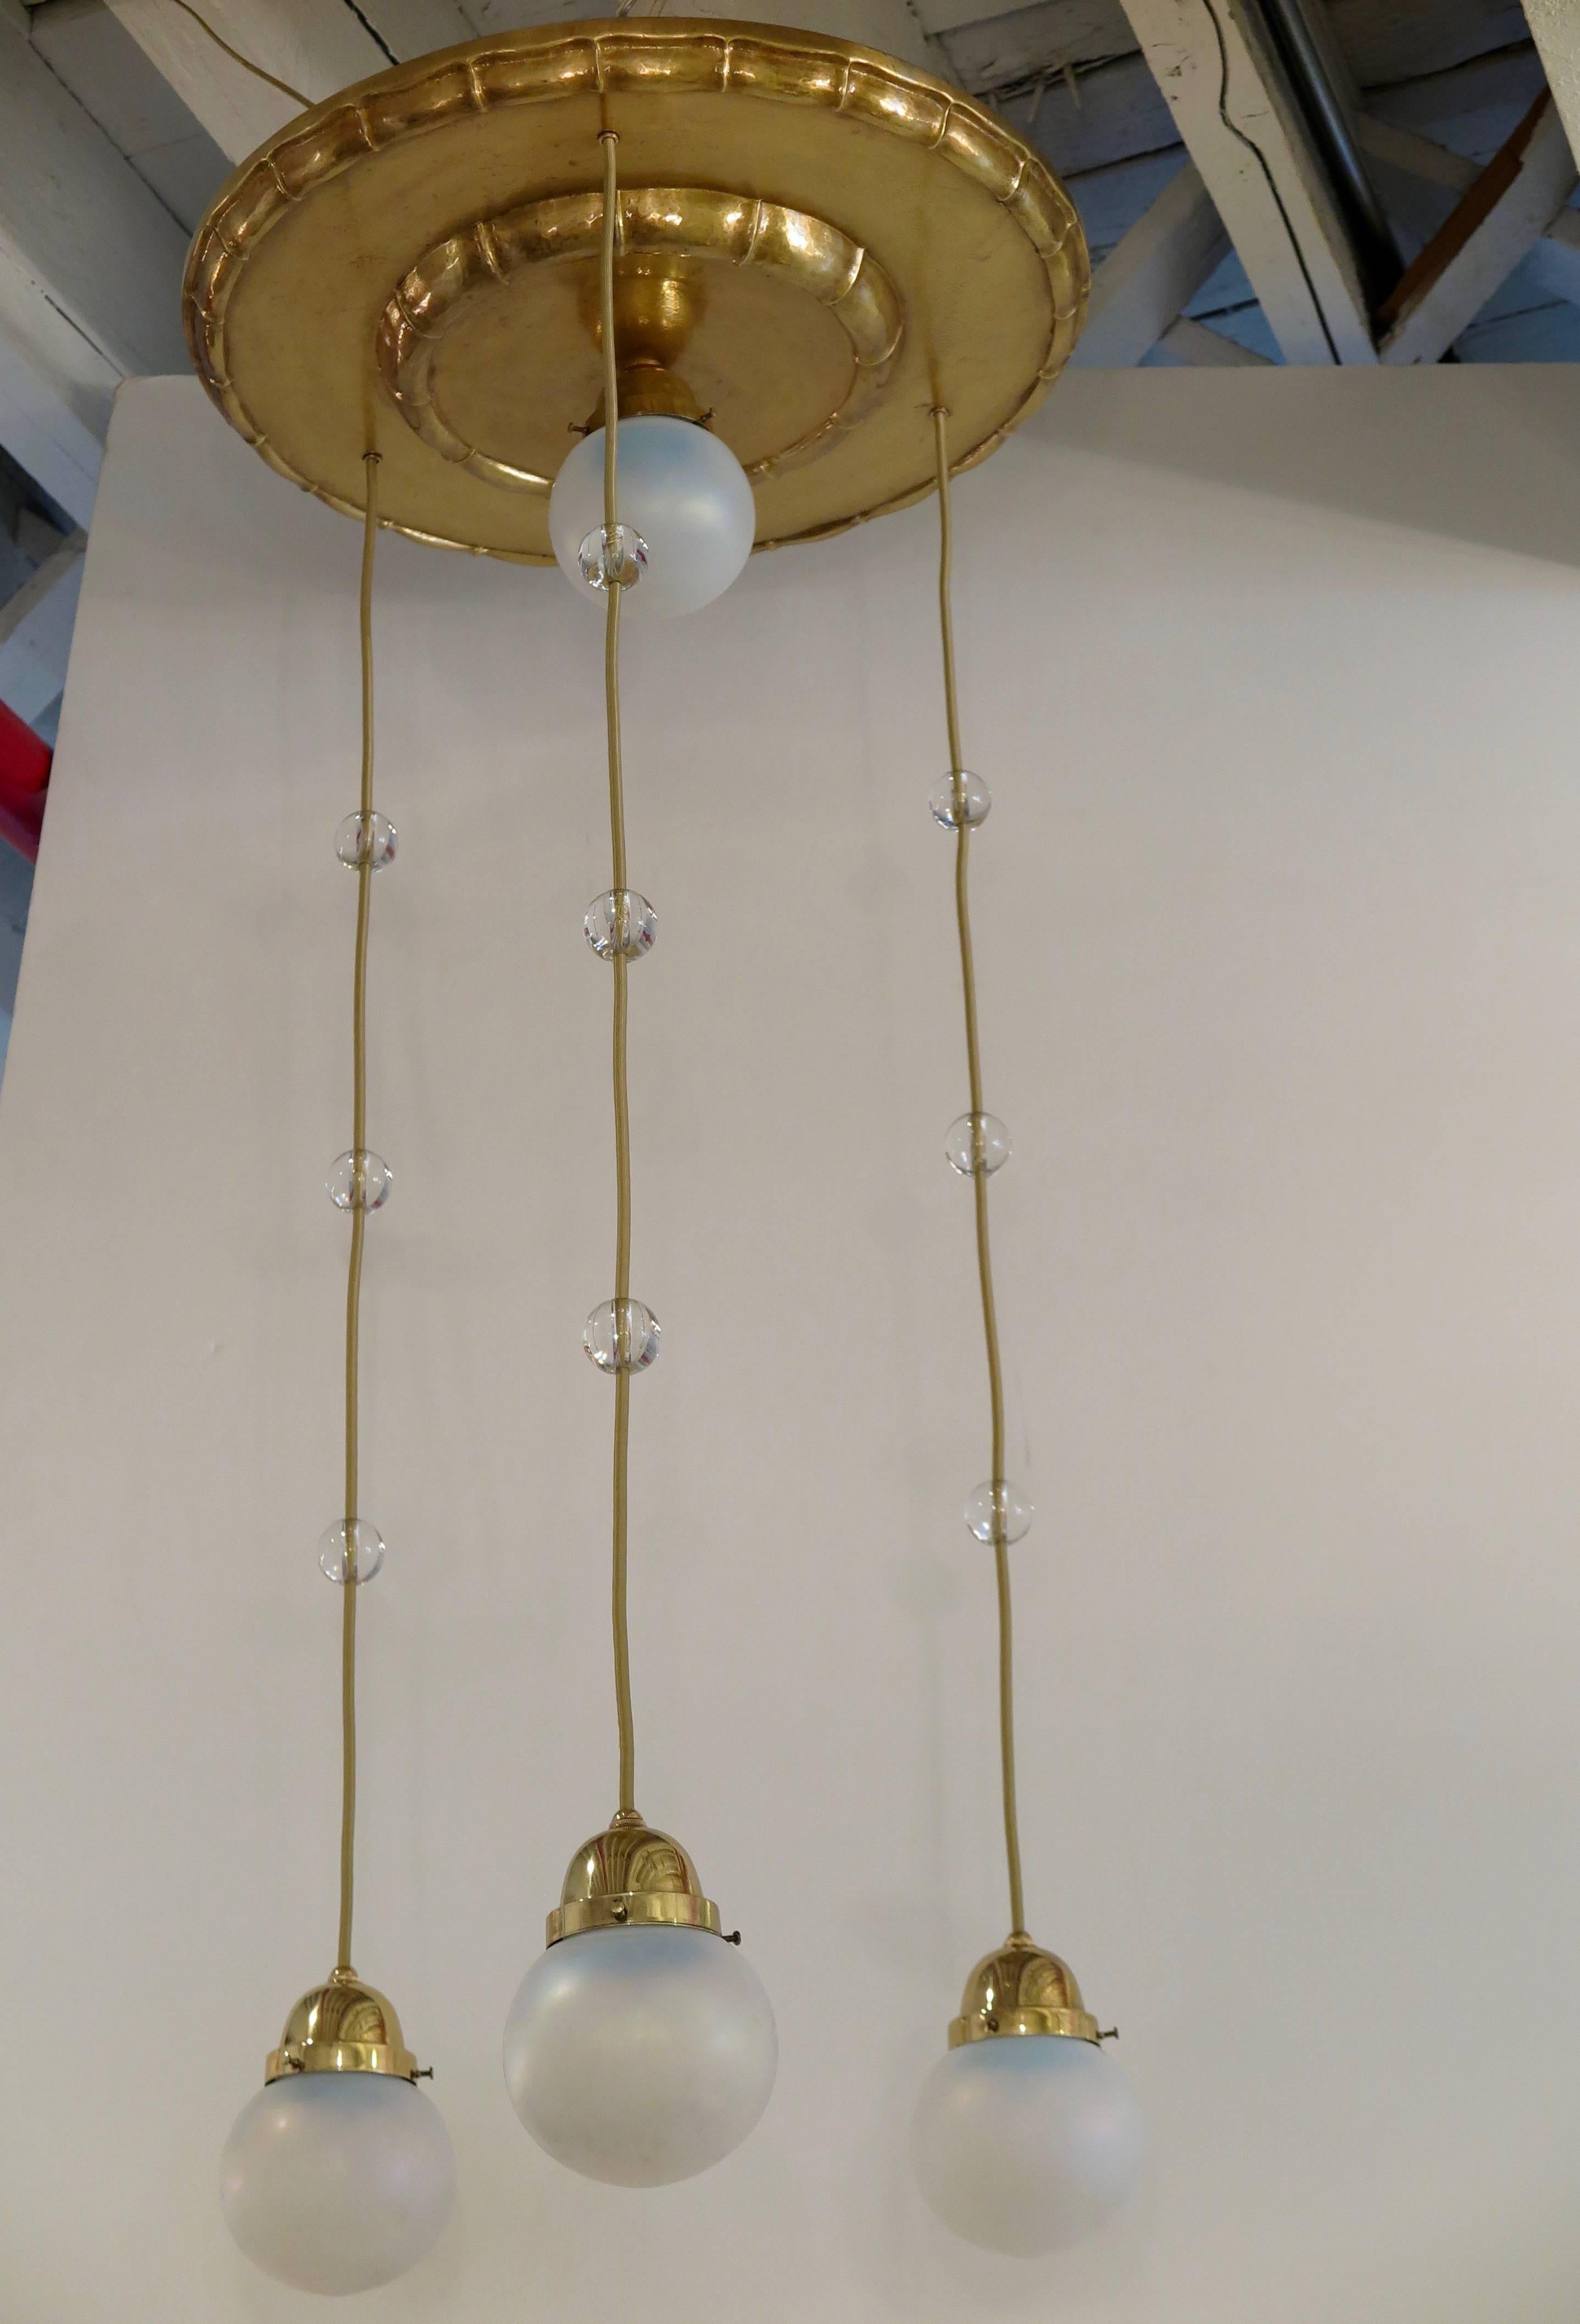 Vienna Secession chandelier with four handblown opalescent glass shades hanging from a decorative round dish in hammered bronze, attributed to Koloman Moser, Vienna, Austria, circa 1905.
Height is adjustable.
Newly electrified for USA.